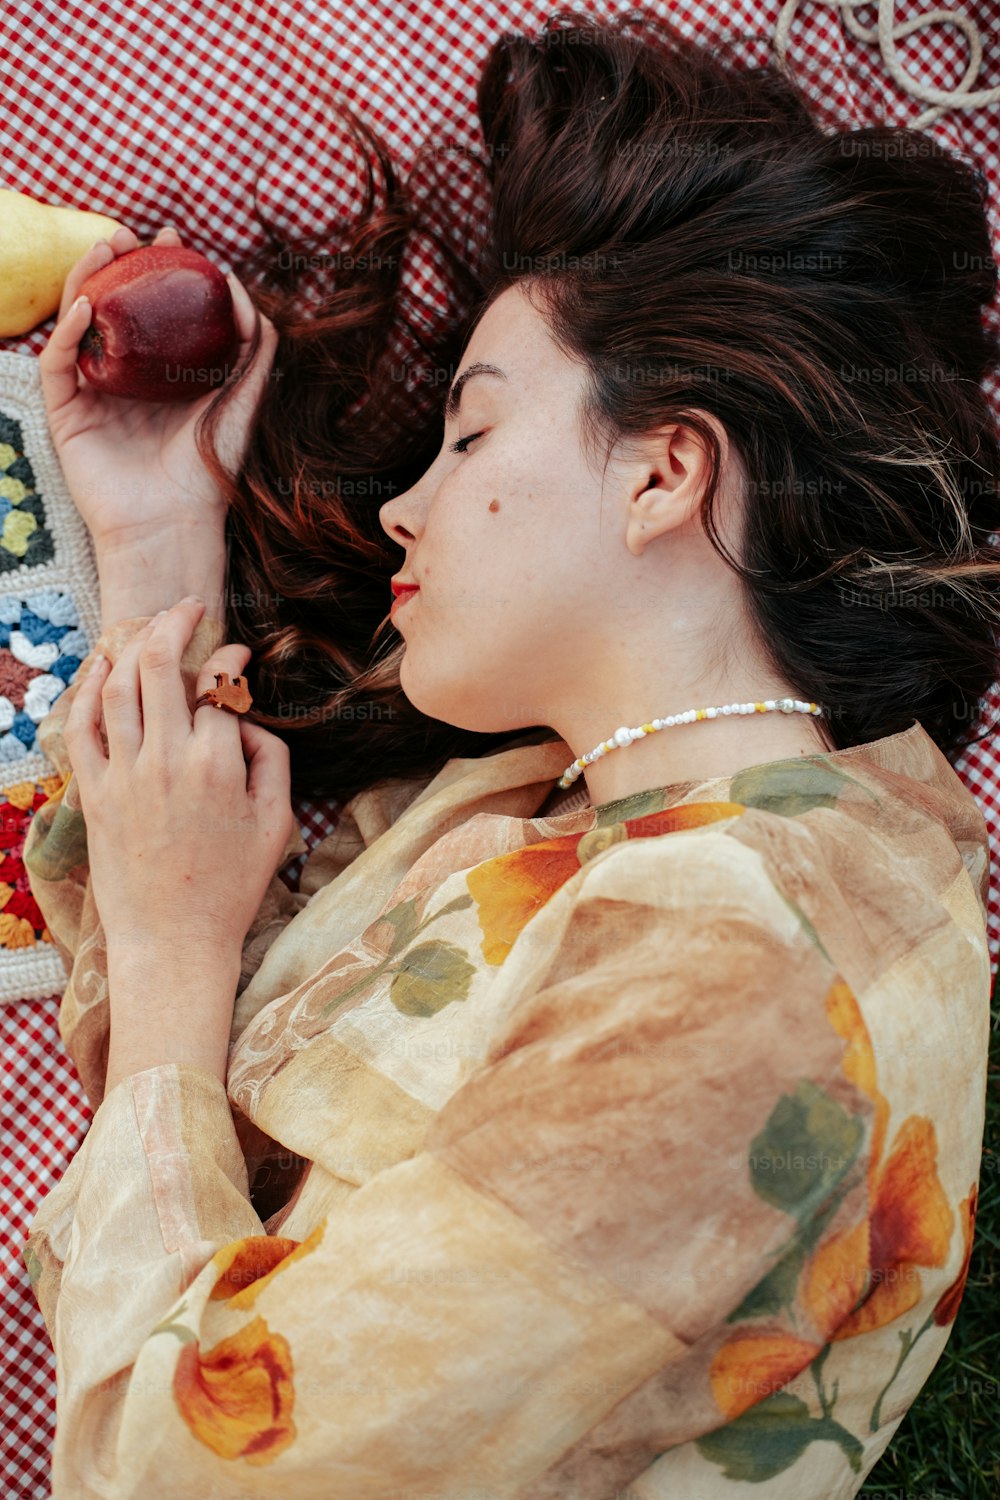 a woman laying on a blanket holding a banana and an apple